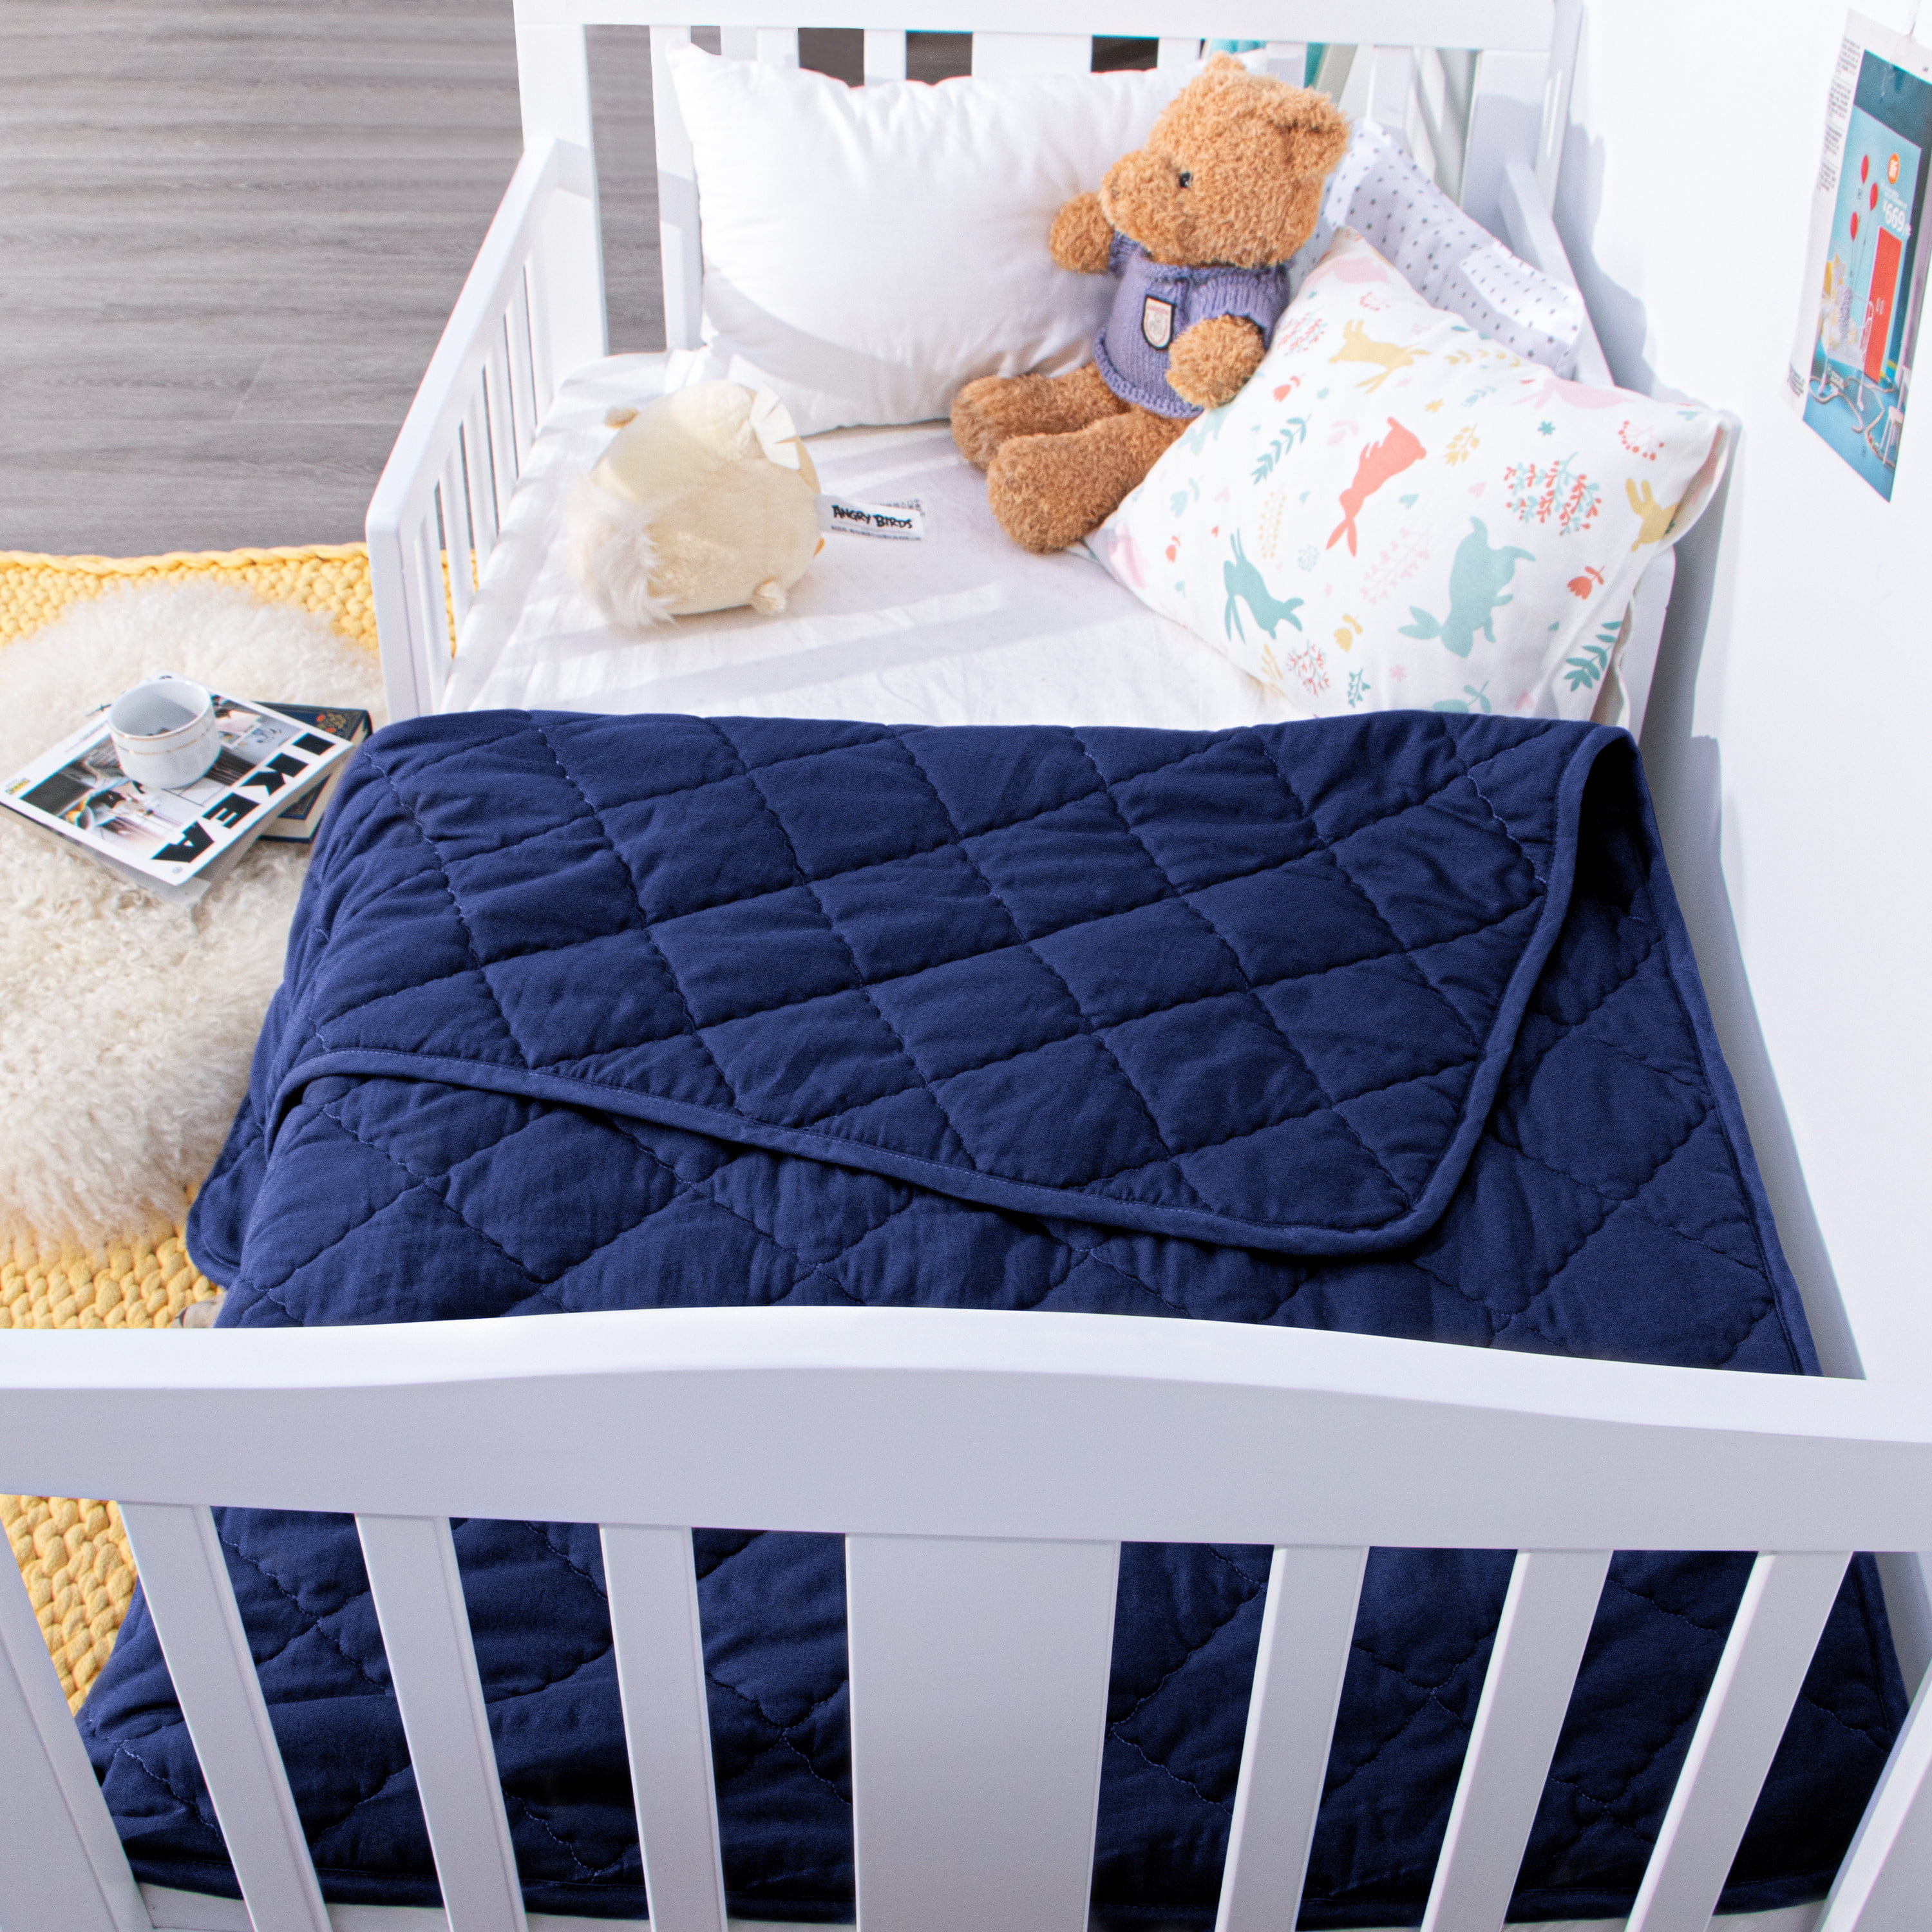 Navy Blue 39 x 47 inches NTBAY Down Alternative Toddler Comforter Lightweight and Warm Solid Color Baby Crib Quilted Blanket 